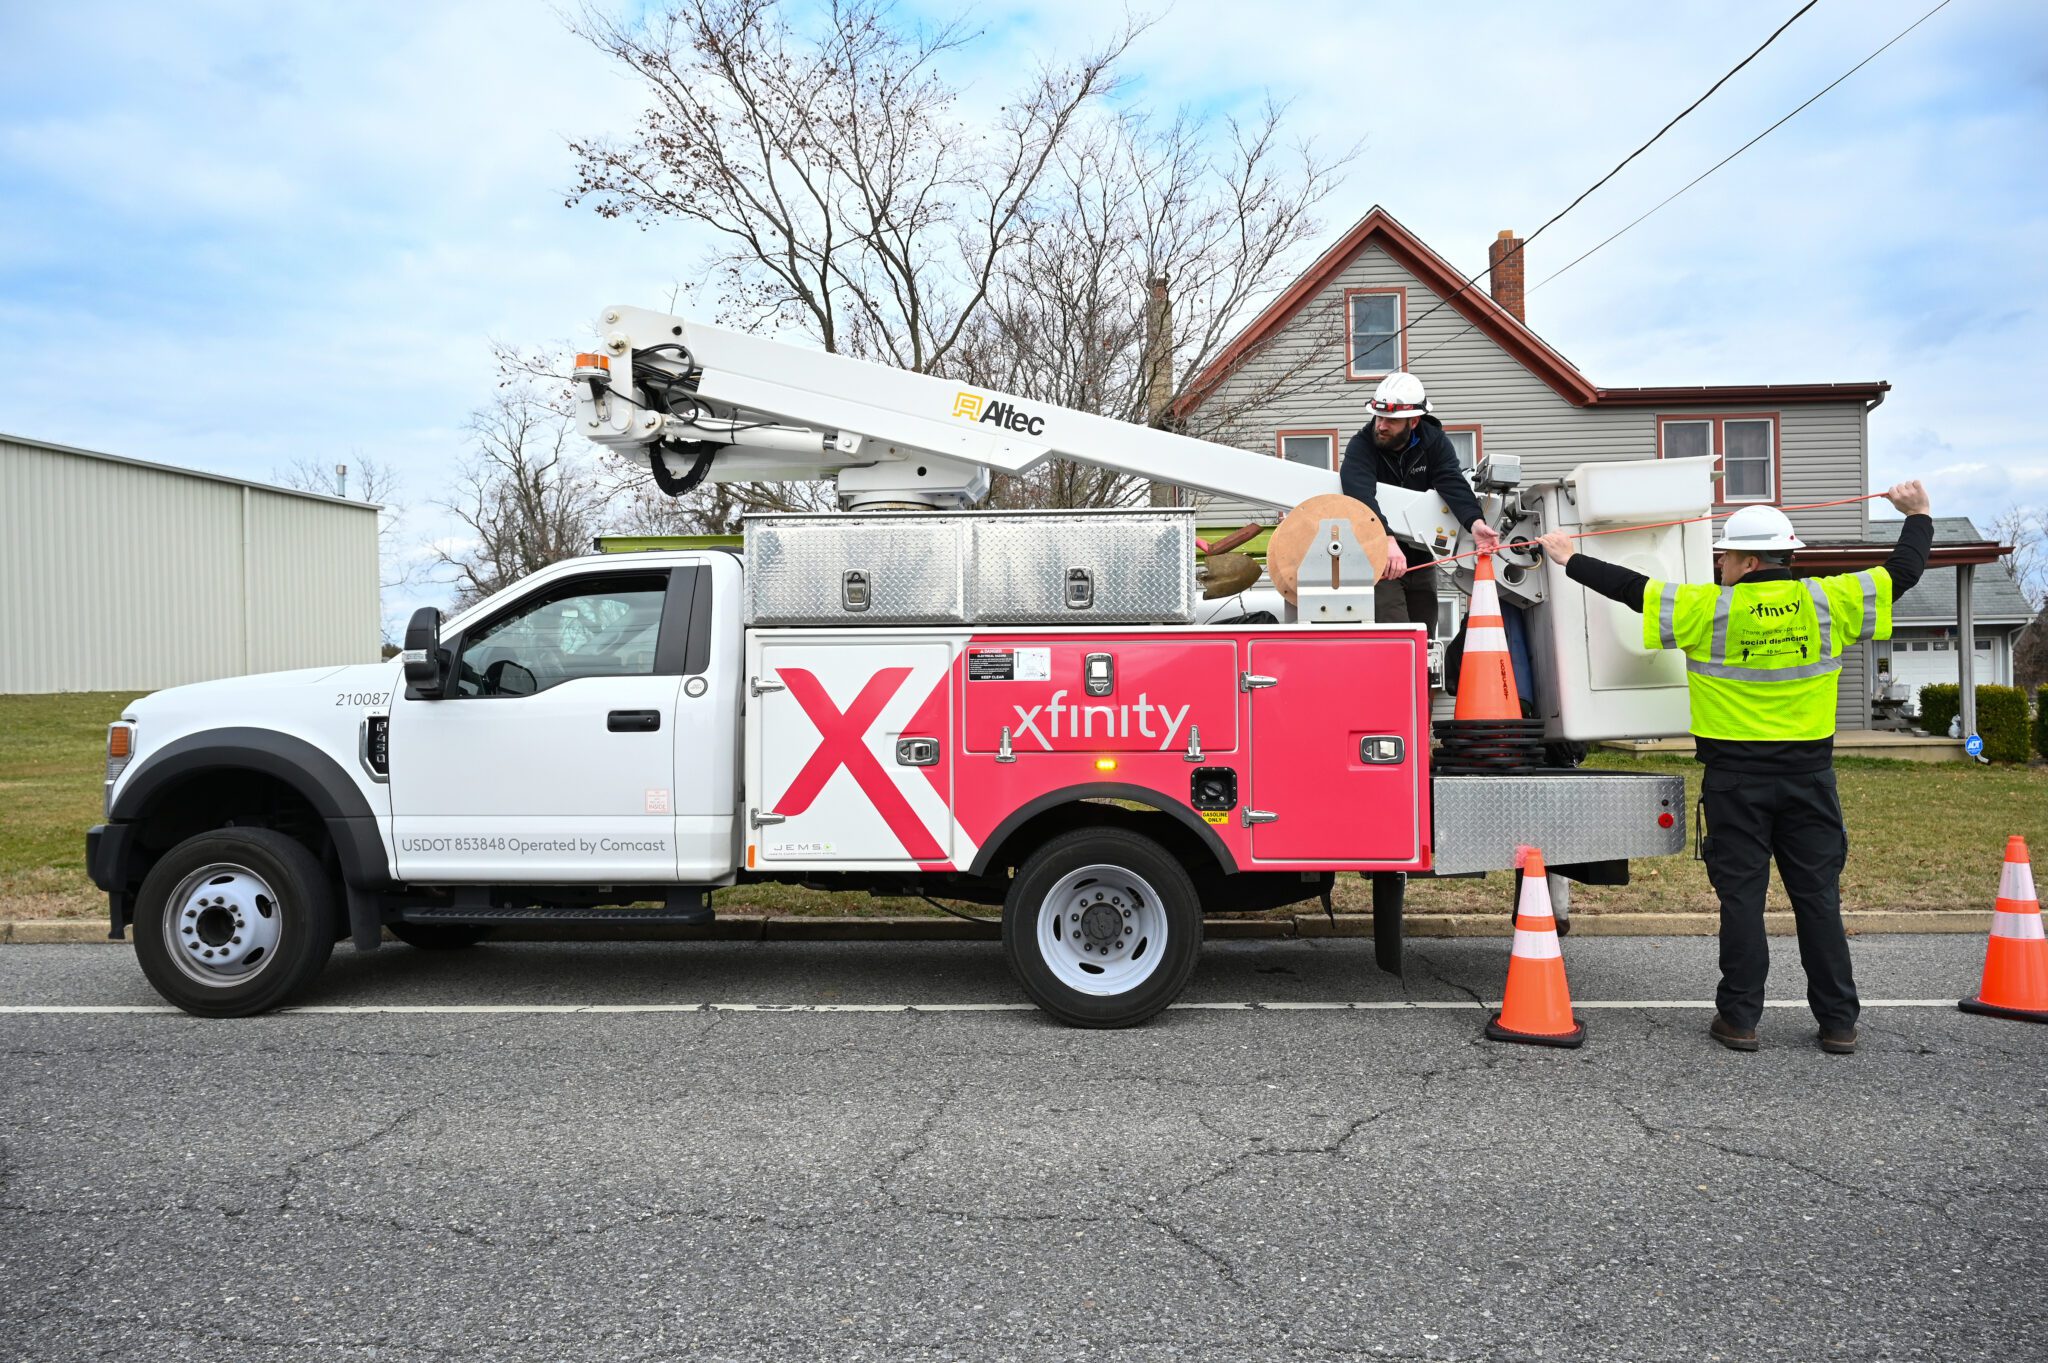 Comcast approved to provide internet services to Edison